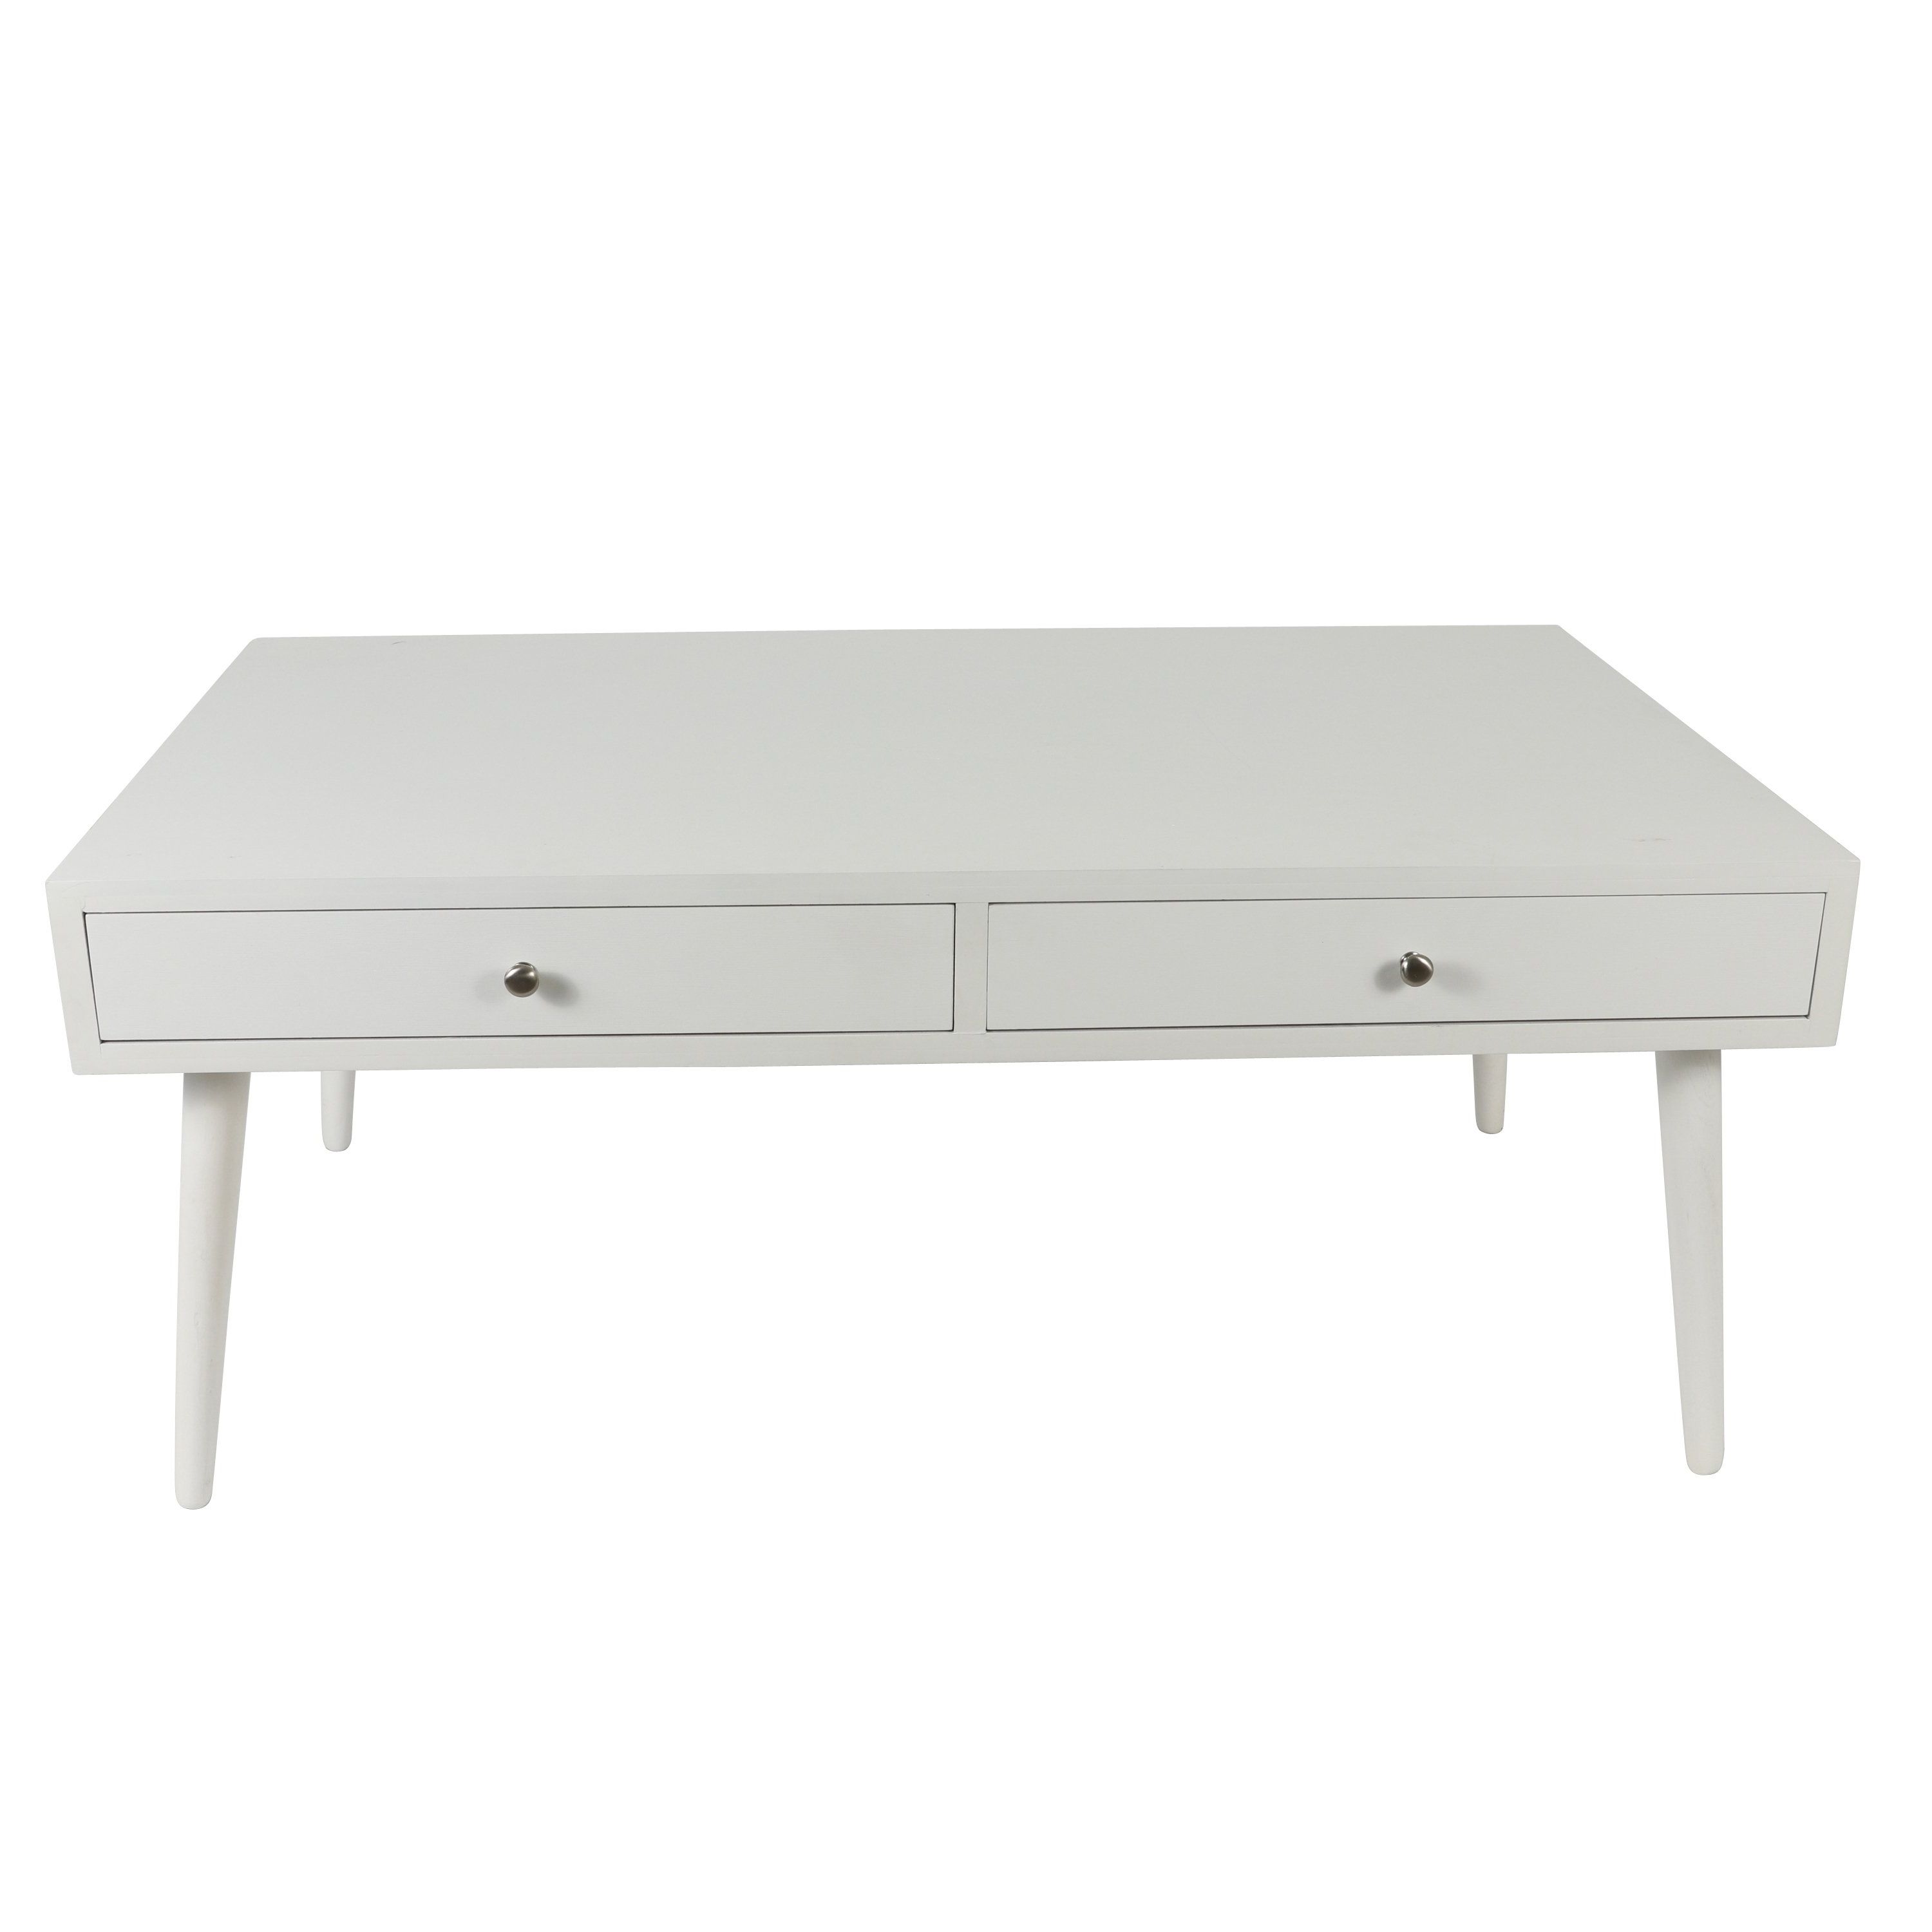 Buy White, Coffee Tables Online At Overstock (View 10 of 20)